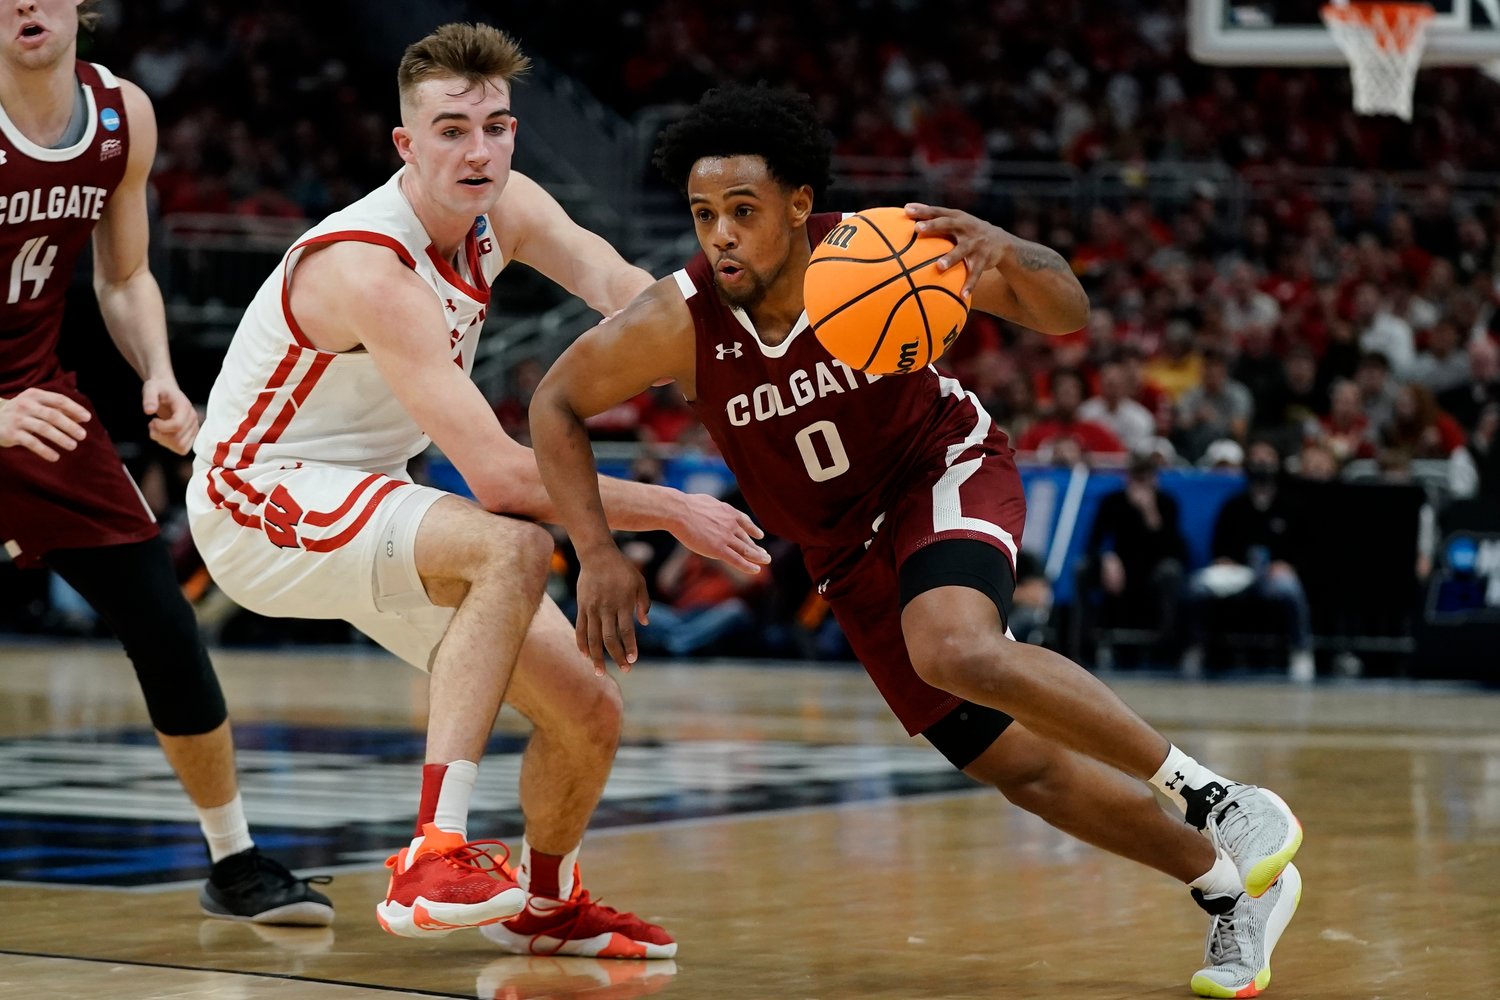 DRIVING BY — Colgate's Nelly Cummings drives by Wisconsin's Tyler Wahl during the first half of a first-round NCAA men's basketball tournament game on Friday night in Milwaukee.